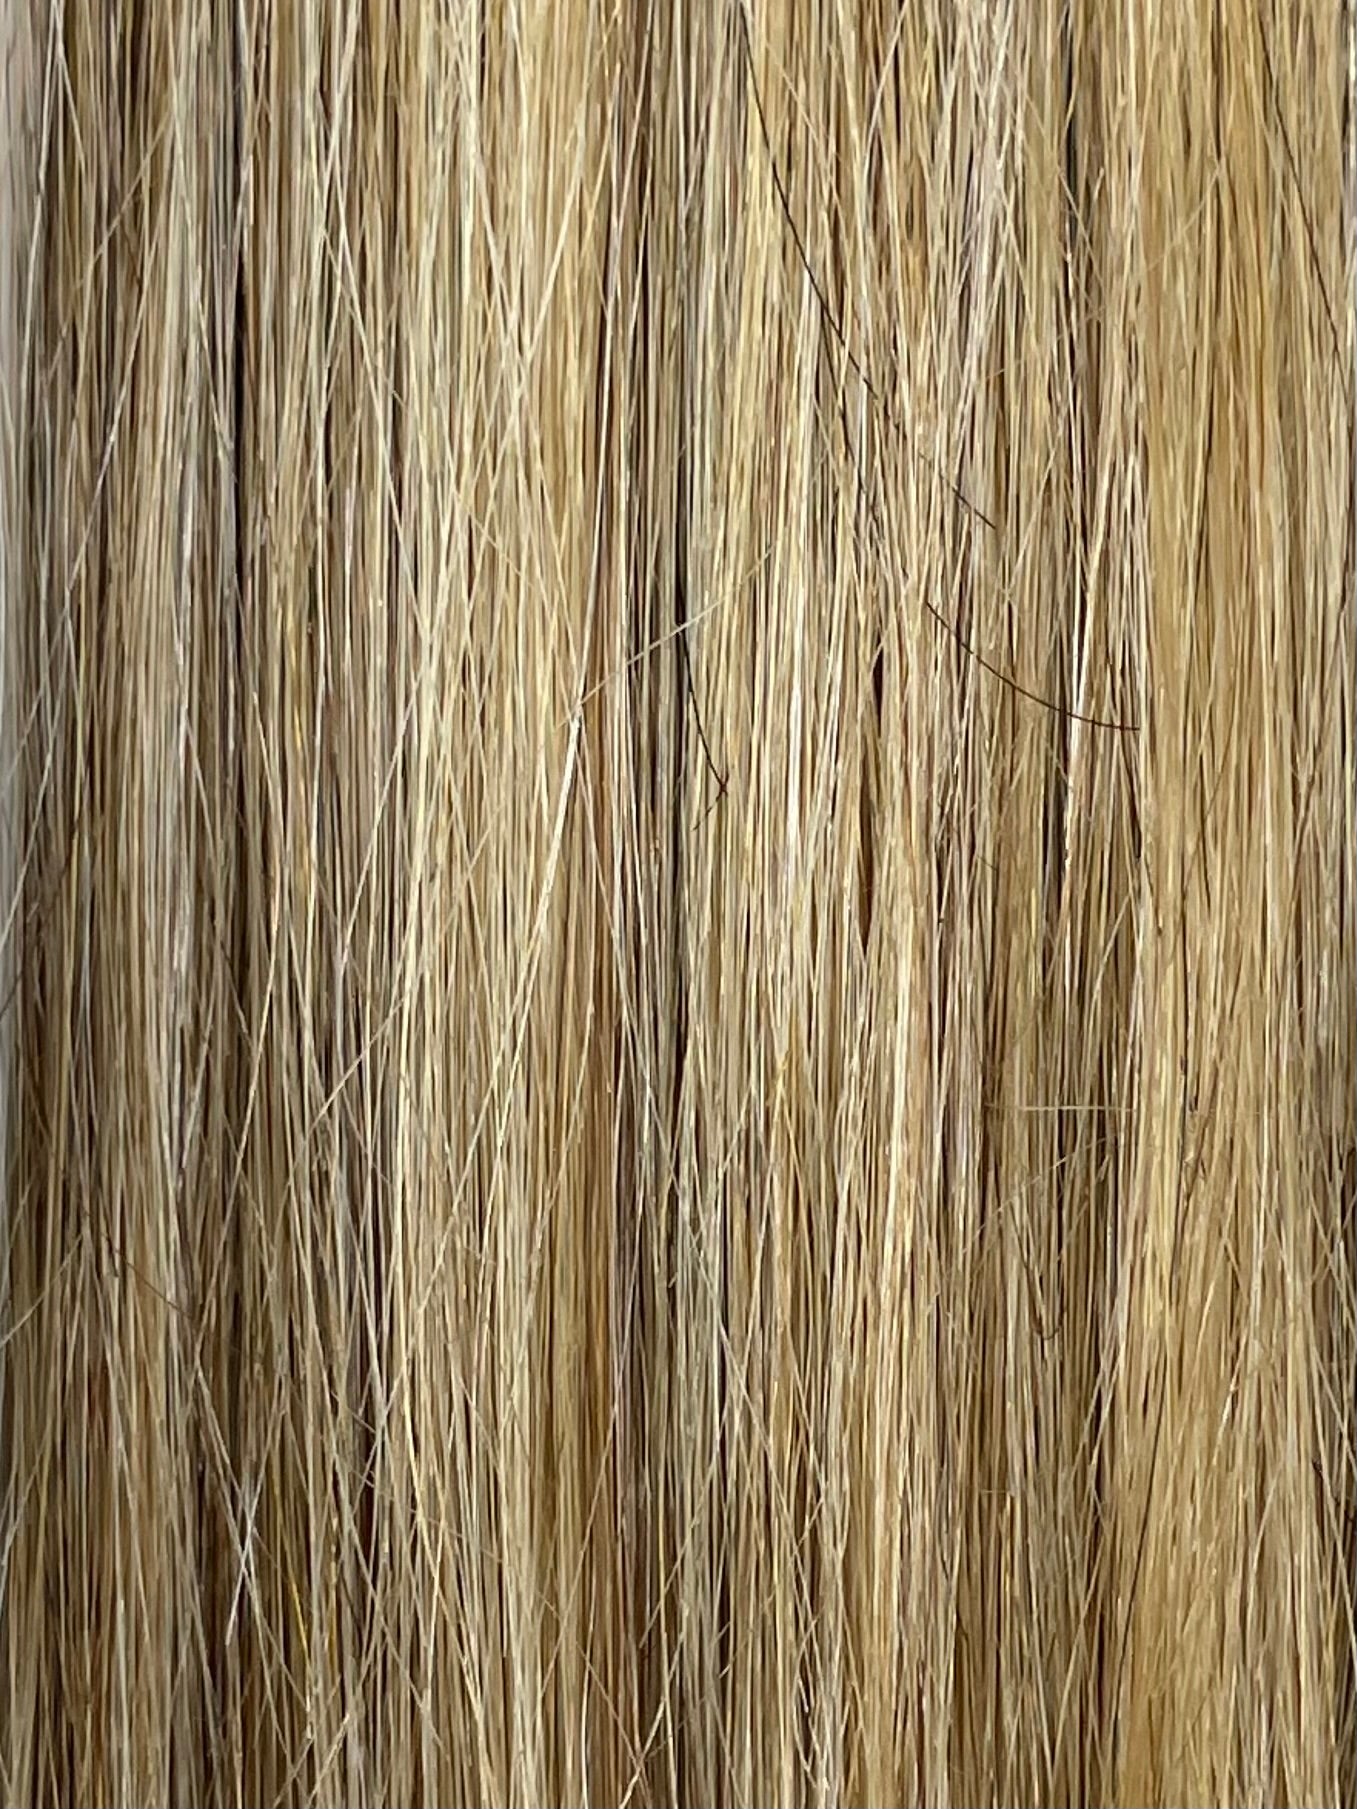 Neophilia Hair Couture I-Tip Remy Human Hair Extension - Straight